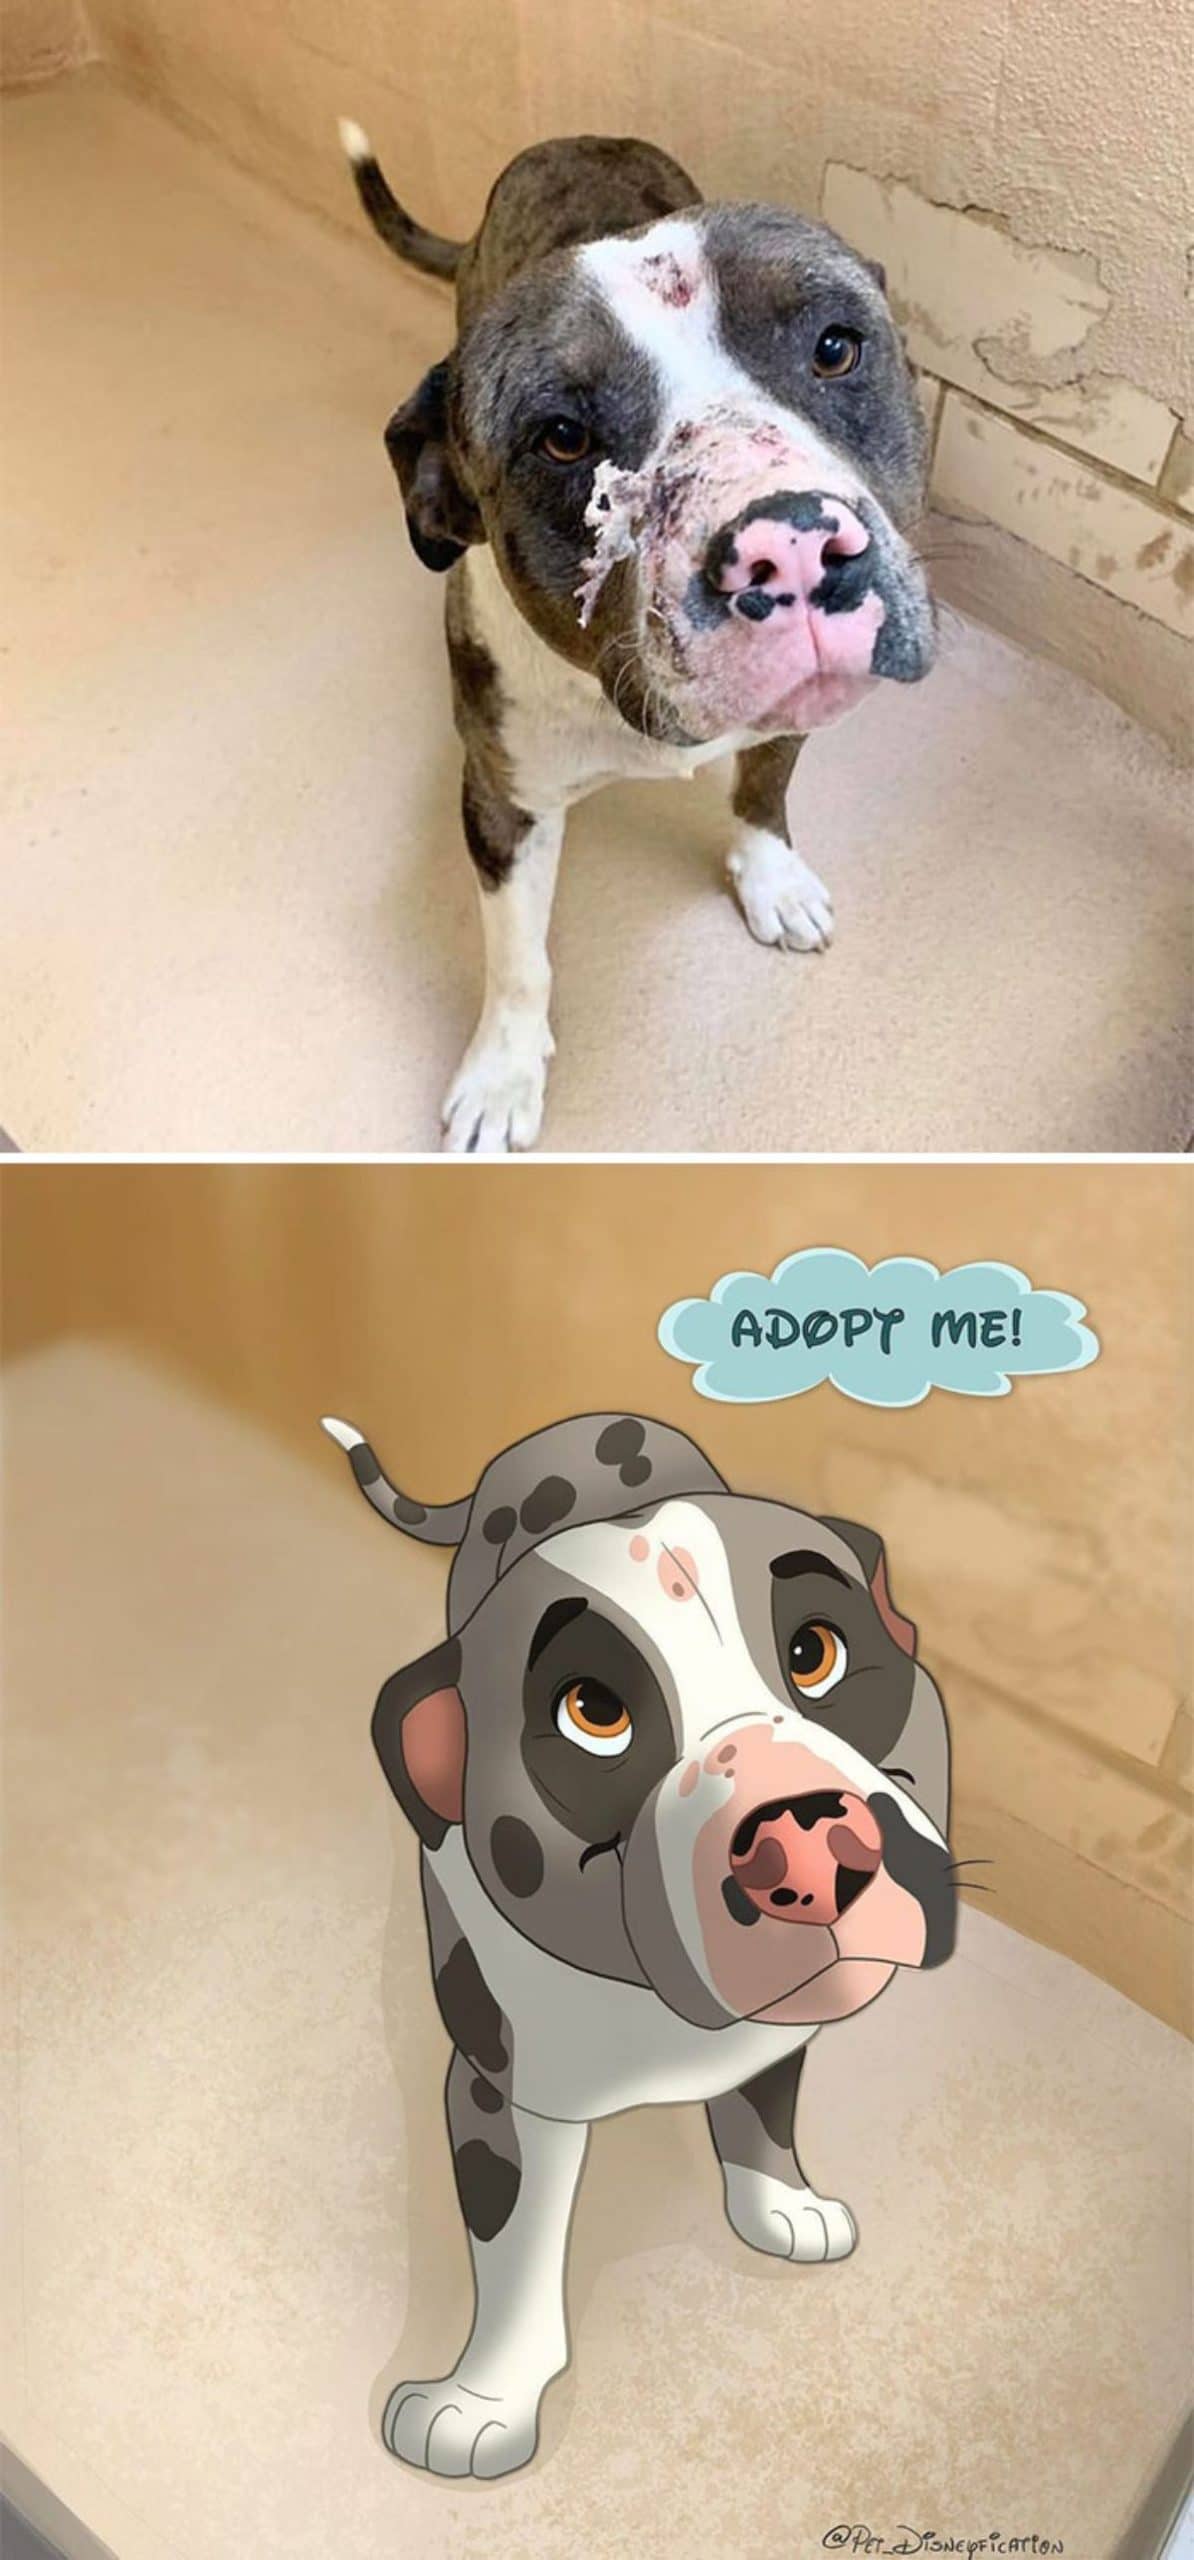 real photo and cartoon image of a black and white pitbull with skin peeling off on its face